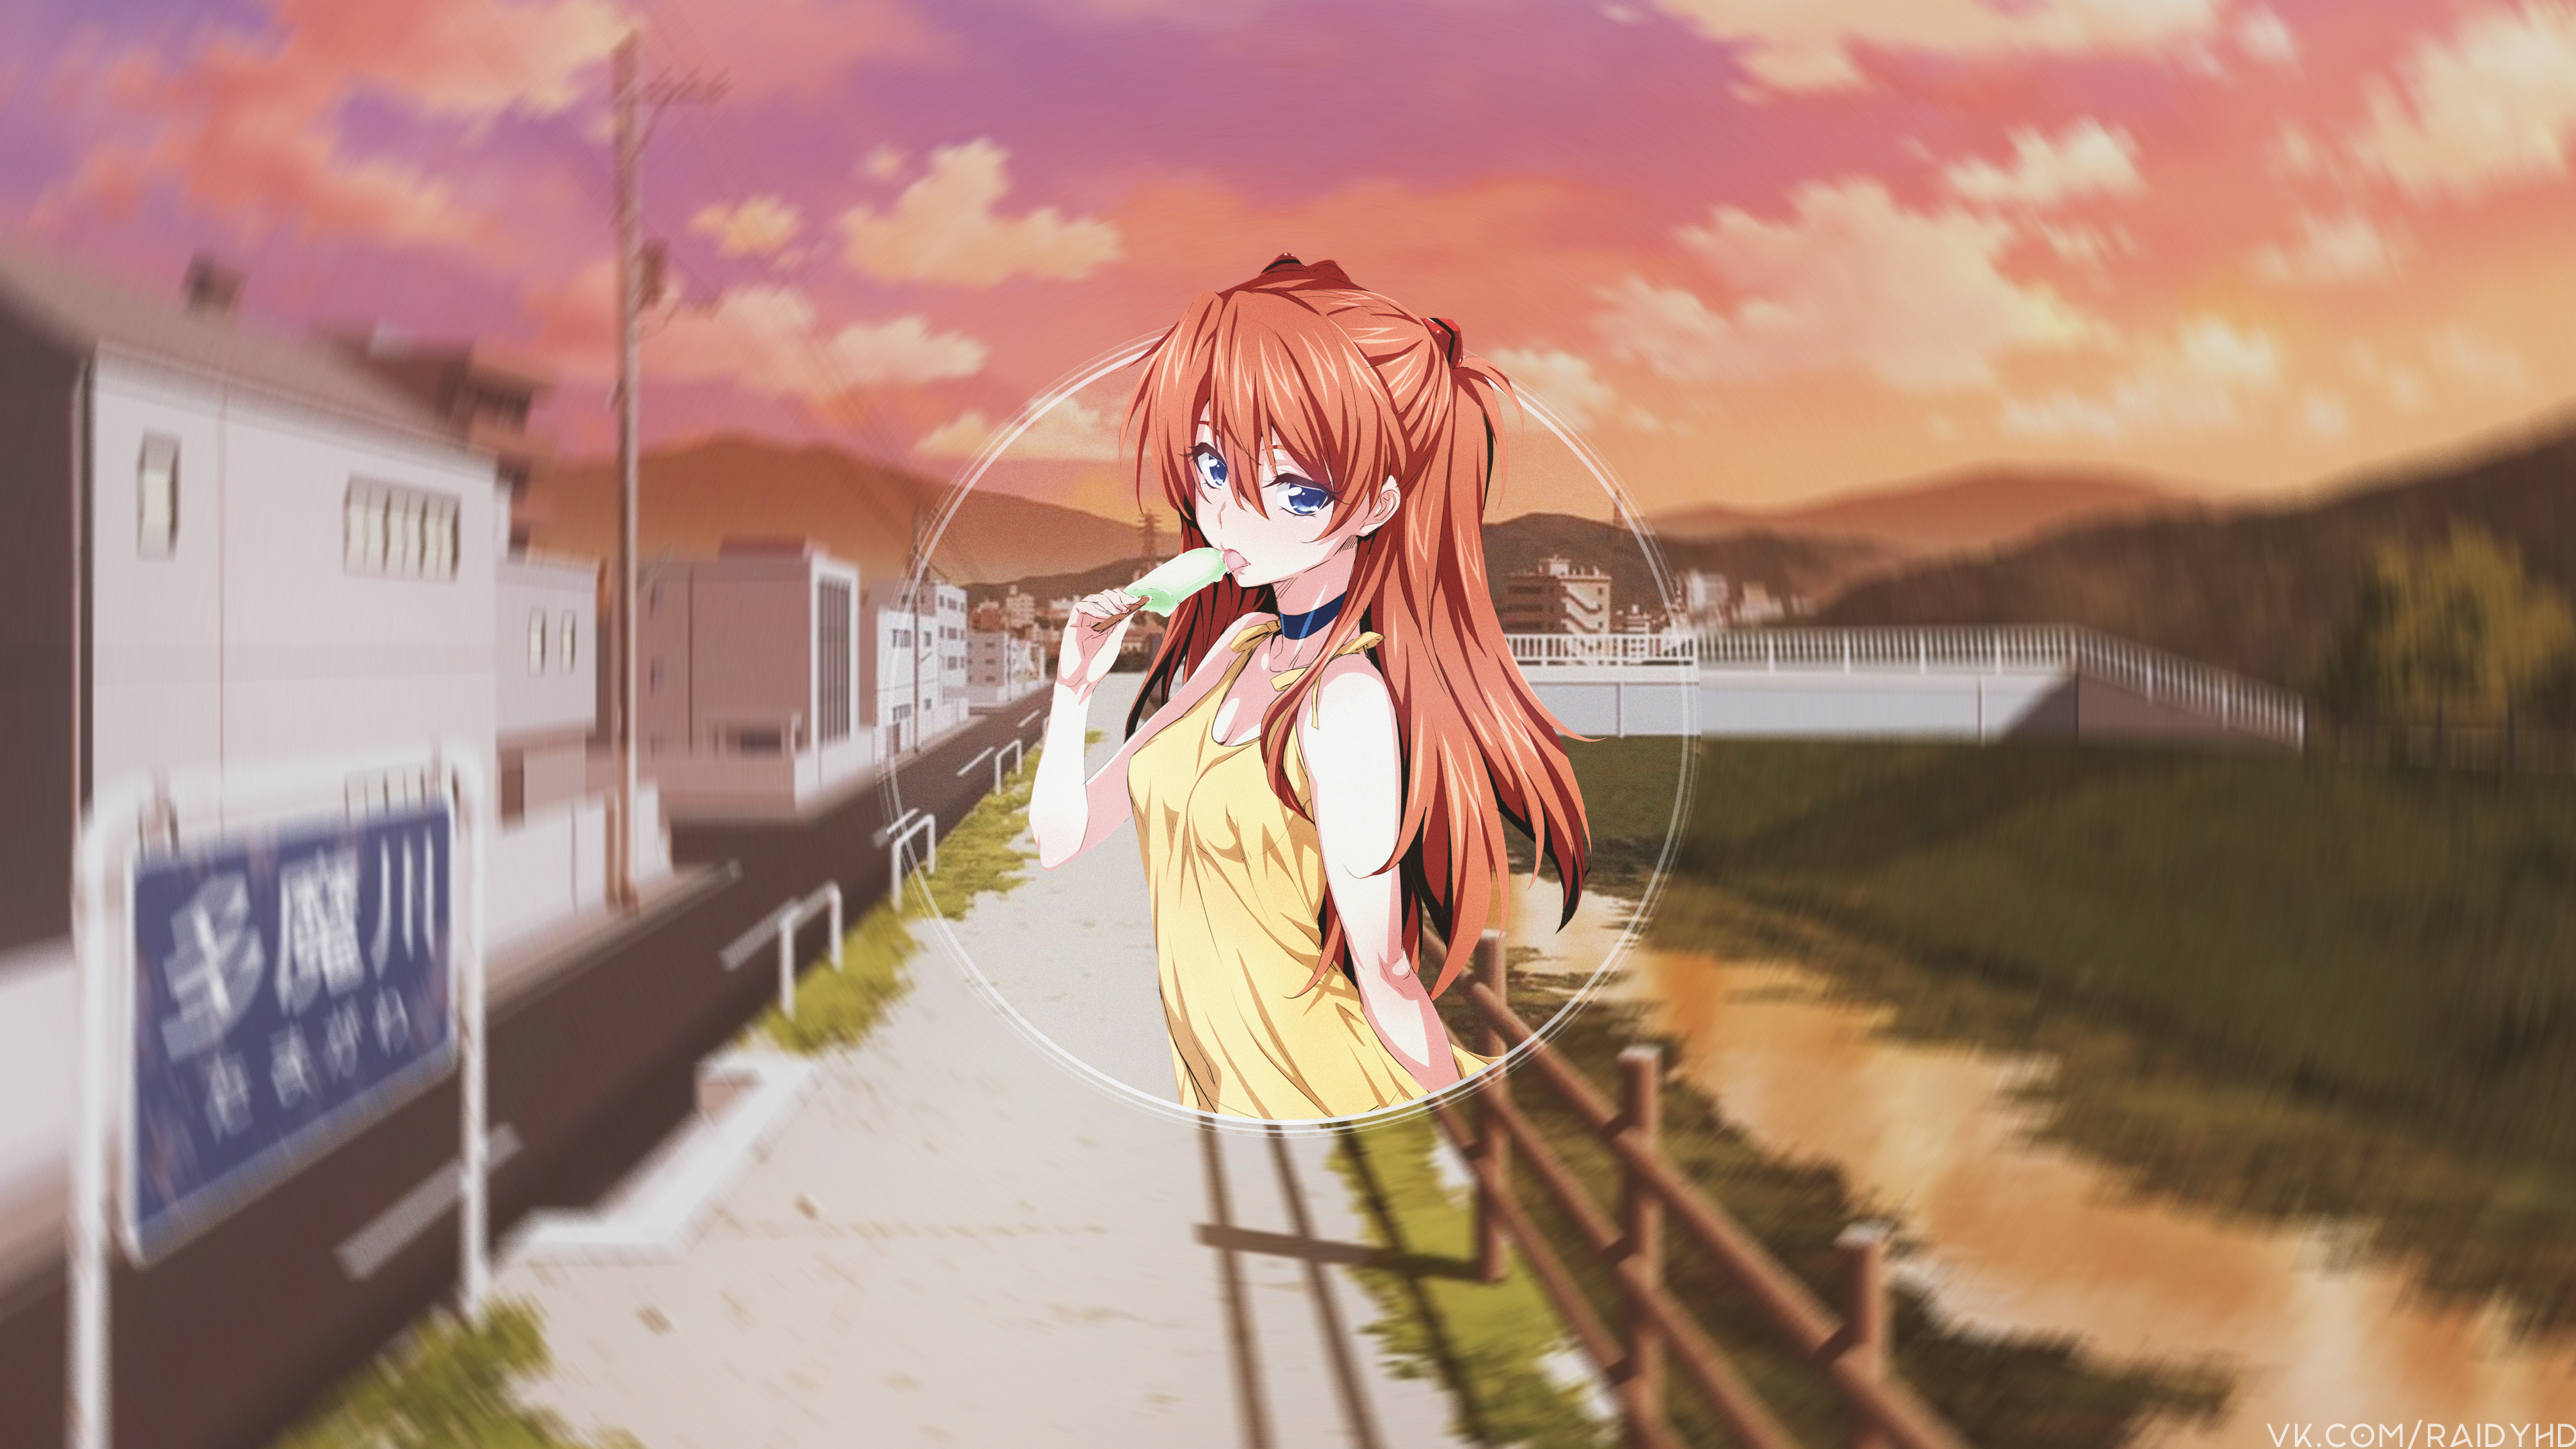 Anime 3840x2160 anime anime girls picture-in-picture Neon Genesis Evangelion Asuka Langley Soryu popsicle